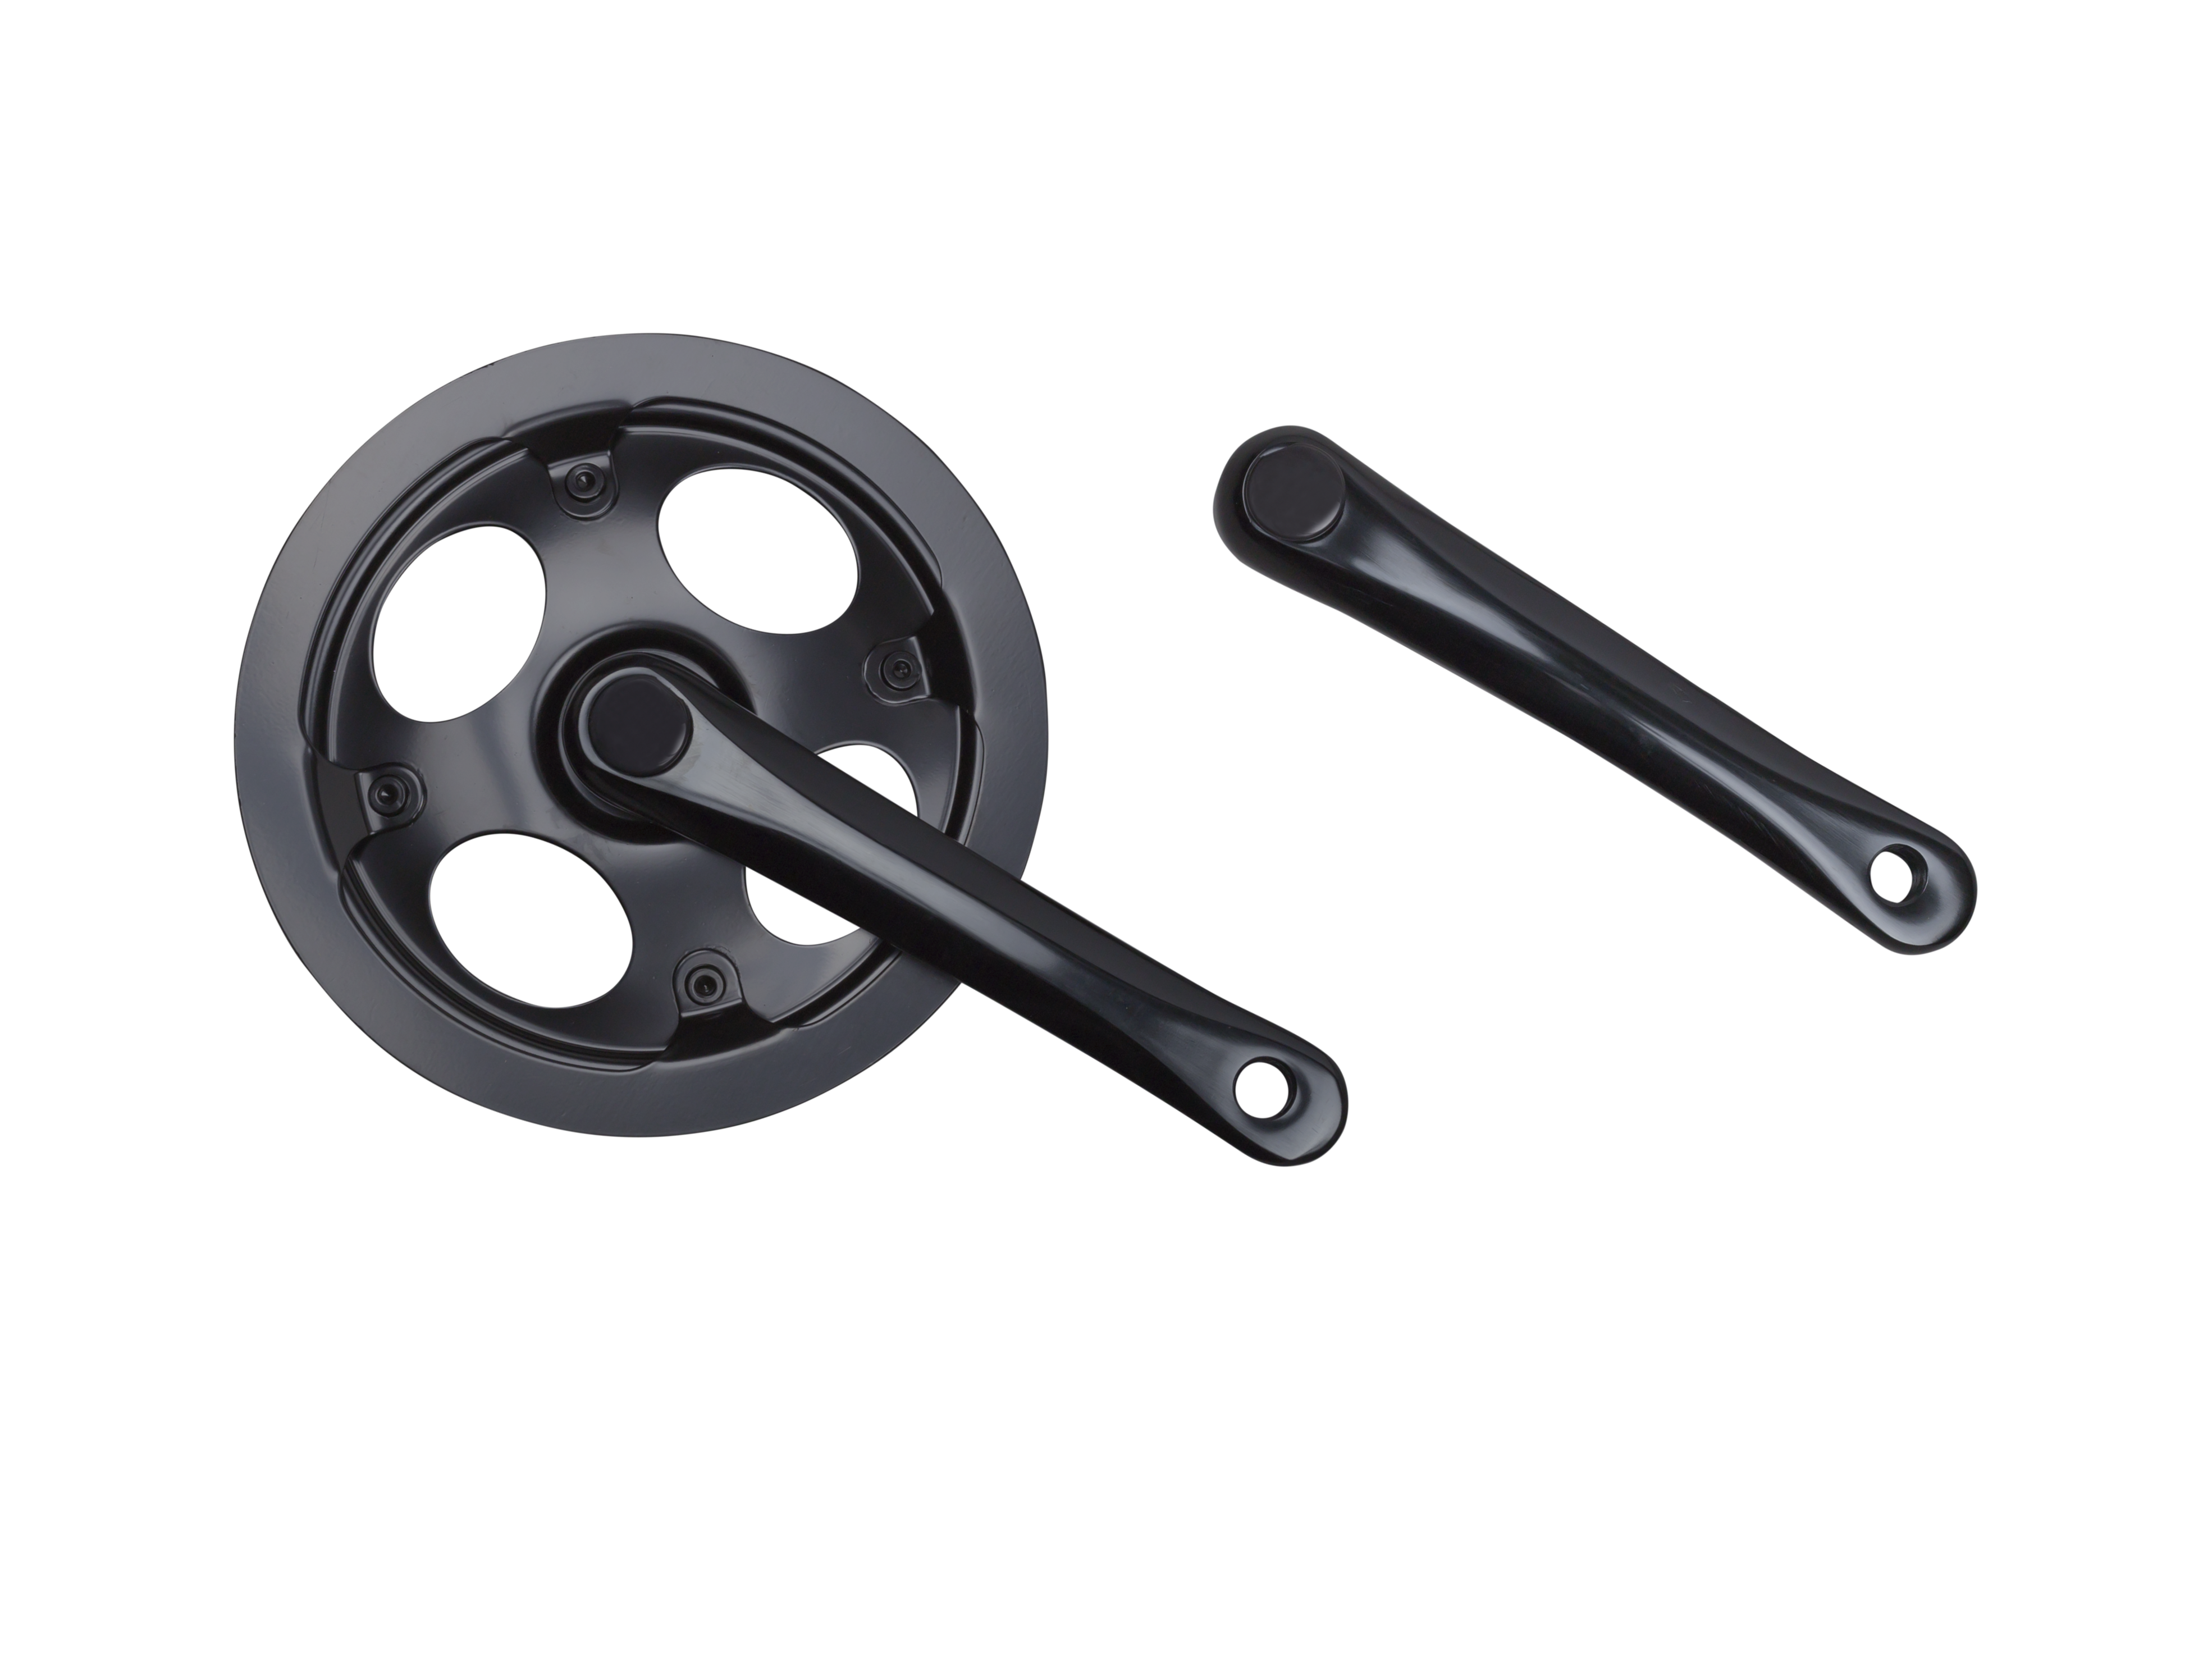 Crank Electra Townie w/Dual Guide 170mm Black